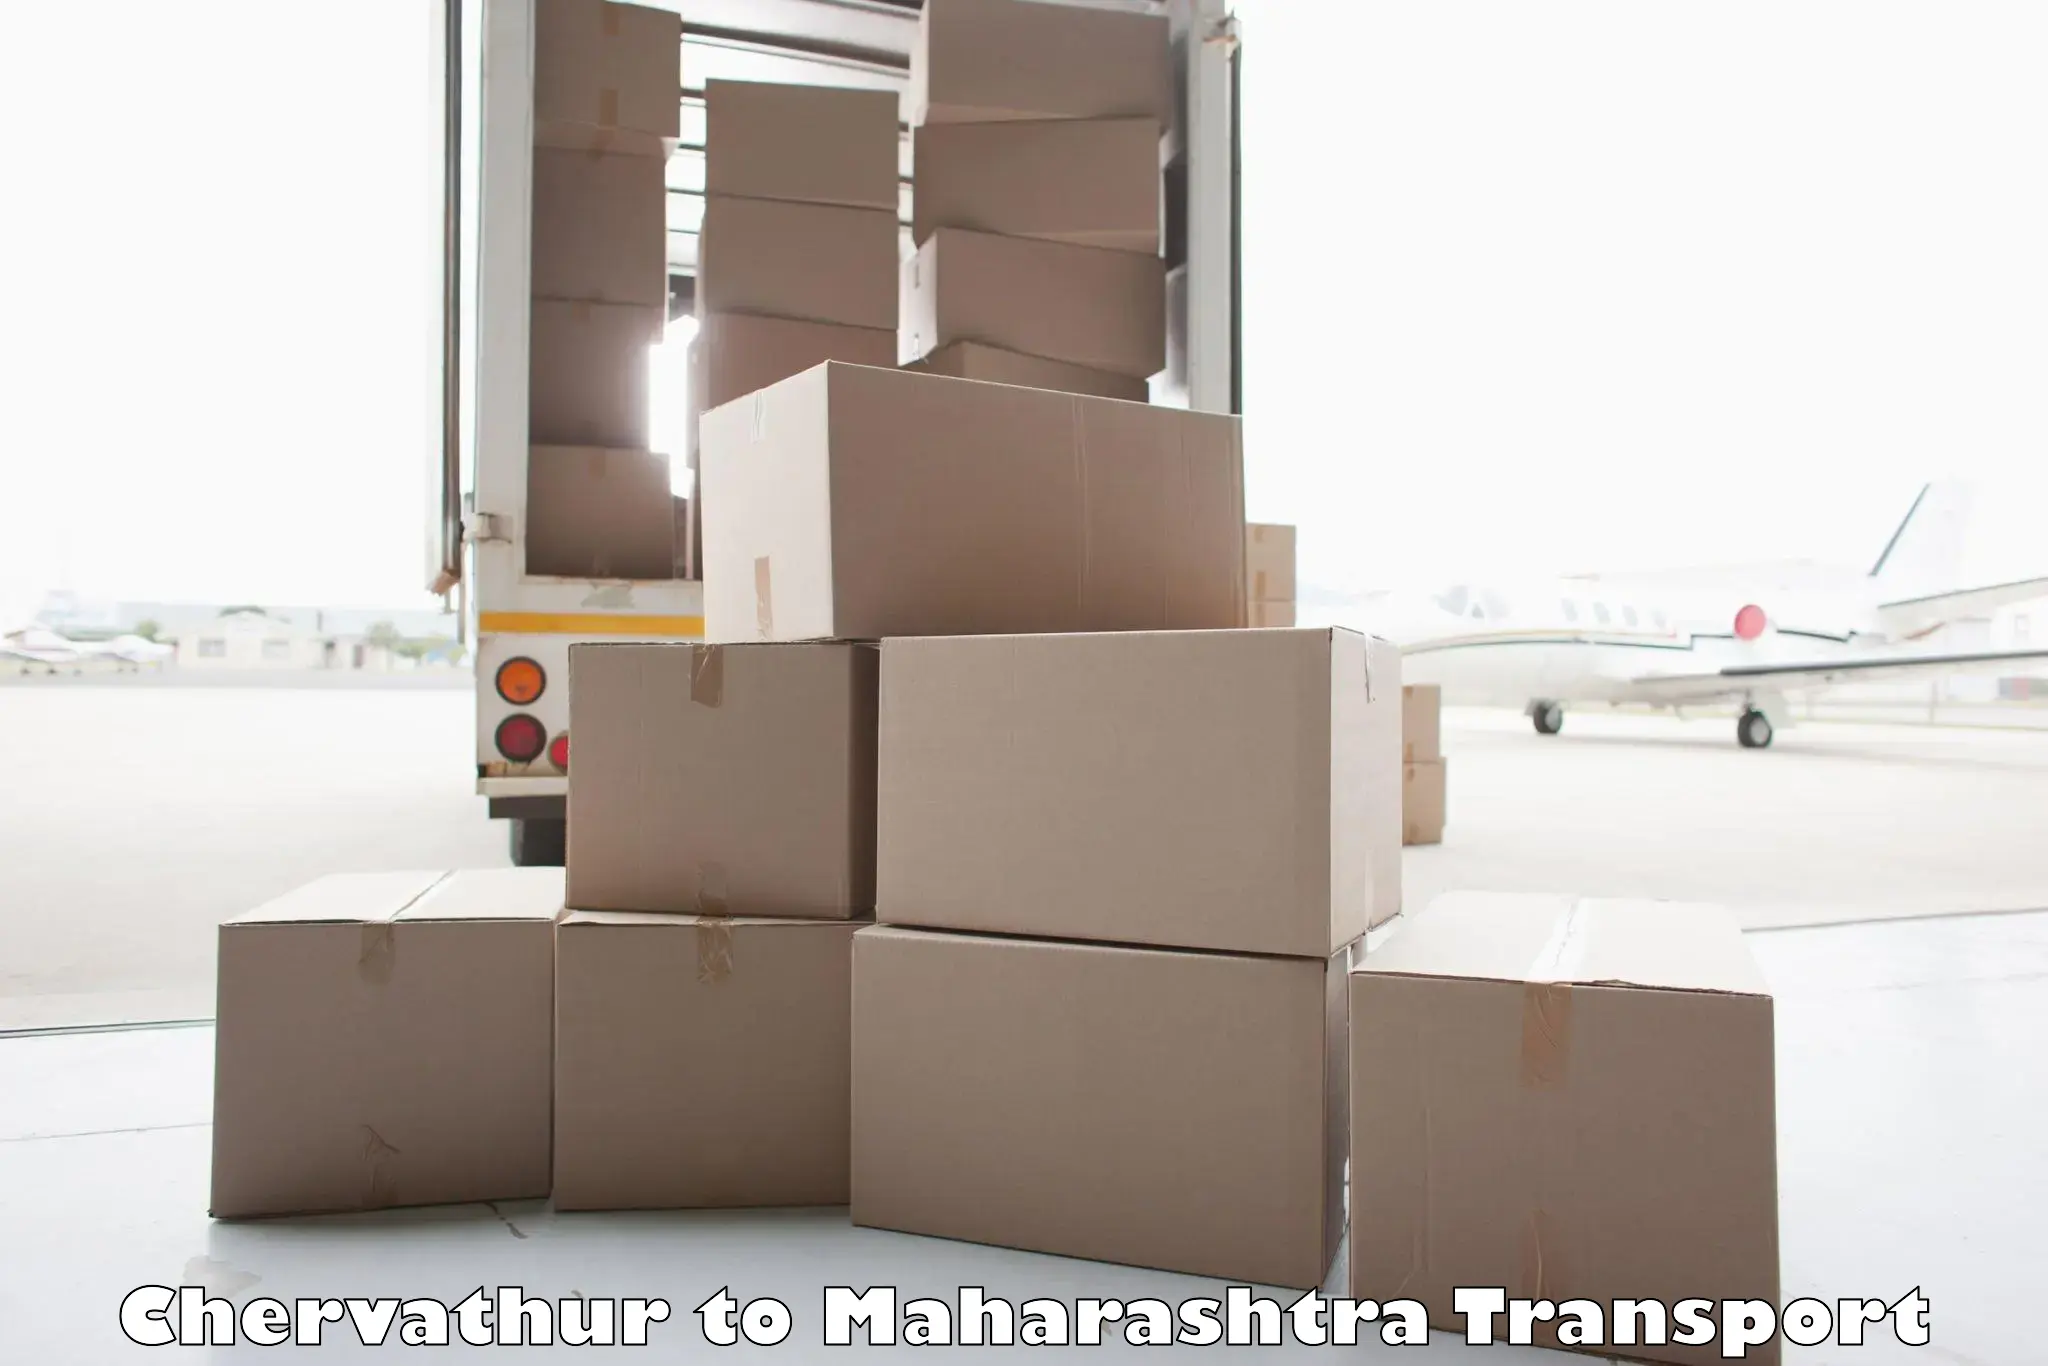 Commercial transport service Chervathur to Andheri